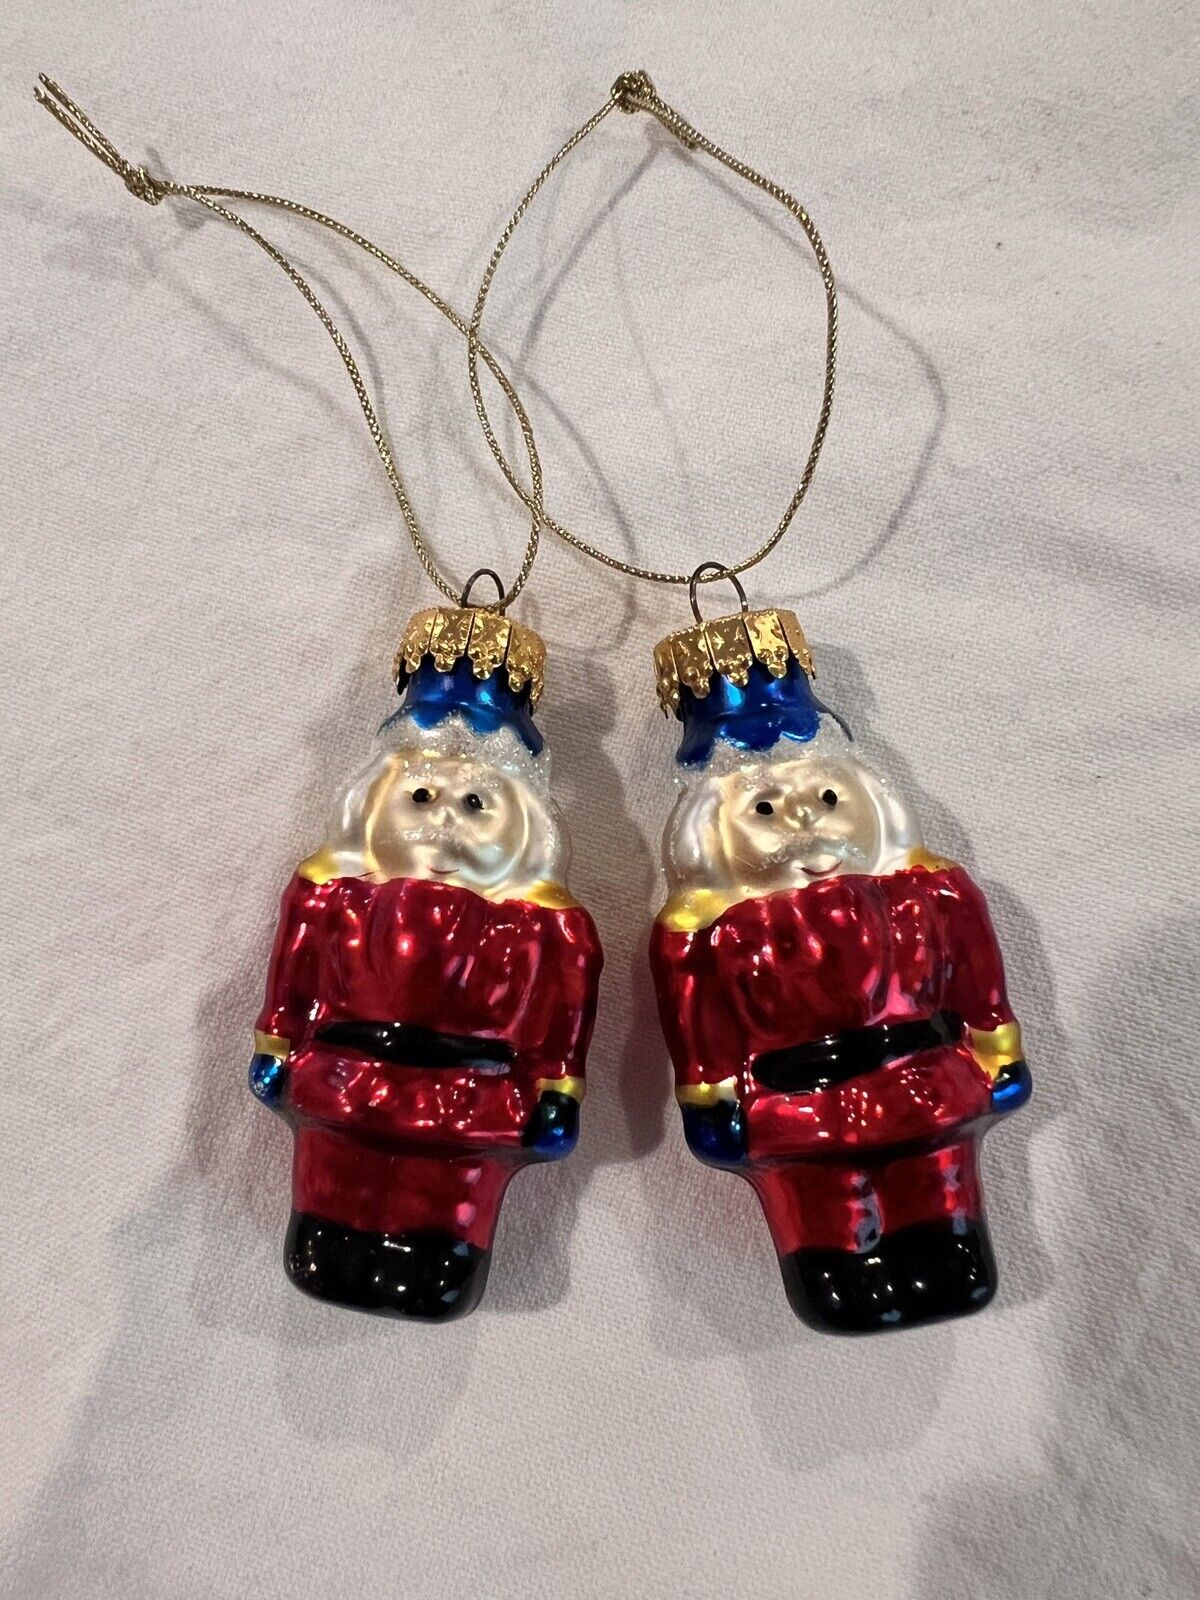 Two Vintage Toy Soldier Glass Ornament (G And D) Christmas